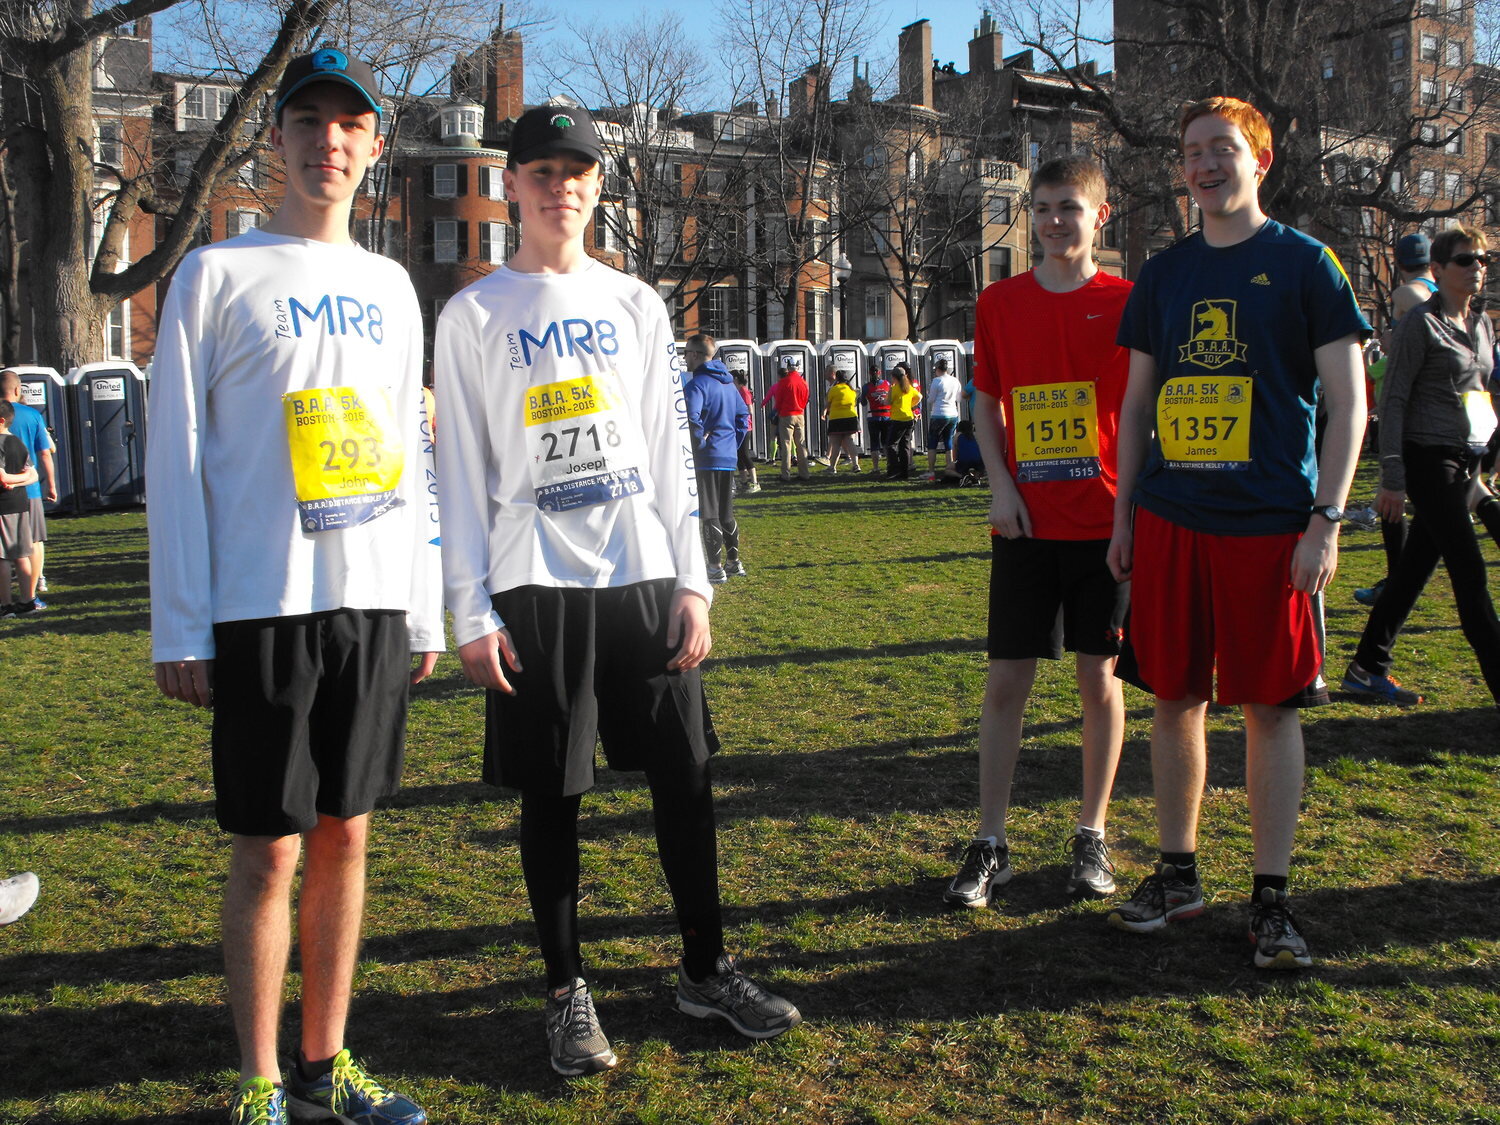  Boston. April 18, 2015. Thousands make their way through the beginning of the racecourse in a steady stream of different colors, backgrounds, Boston Strong shirts, and Martin Richard 8 jerseys, all with a personal vendetta - some running for persona